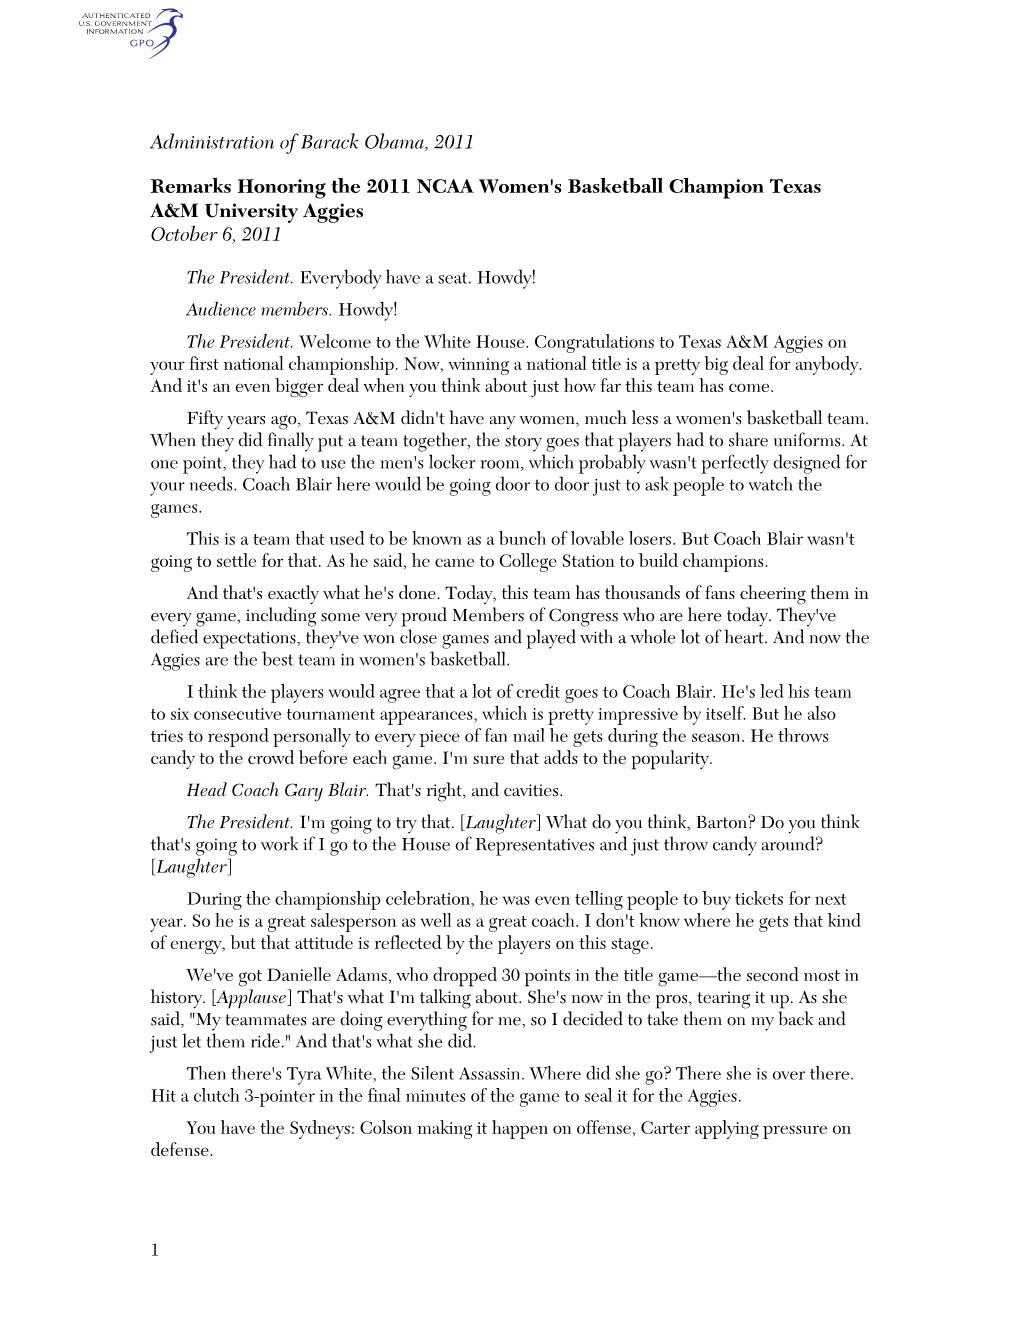 Administration of Barack Obama, 2011 Remarks Honoring the 2011 NCAA Women's Basketball Champion Texas A&M University Aggies